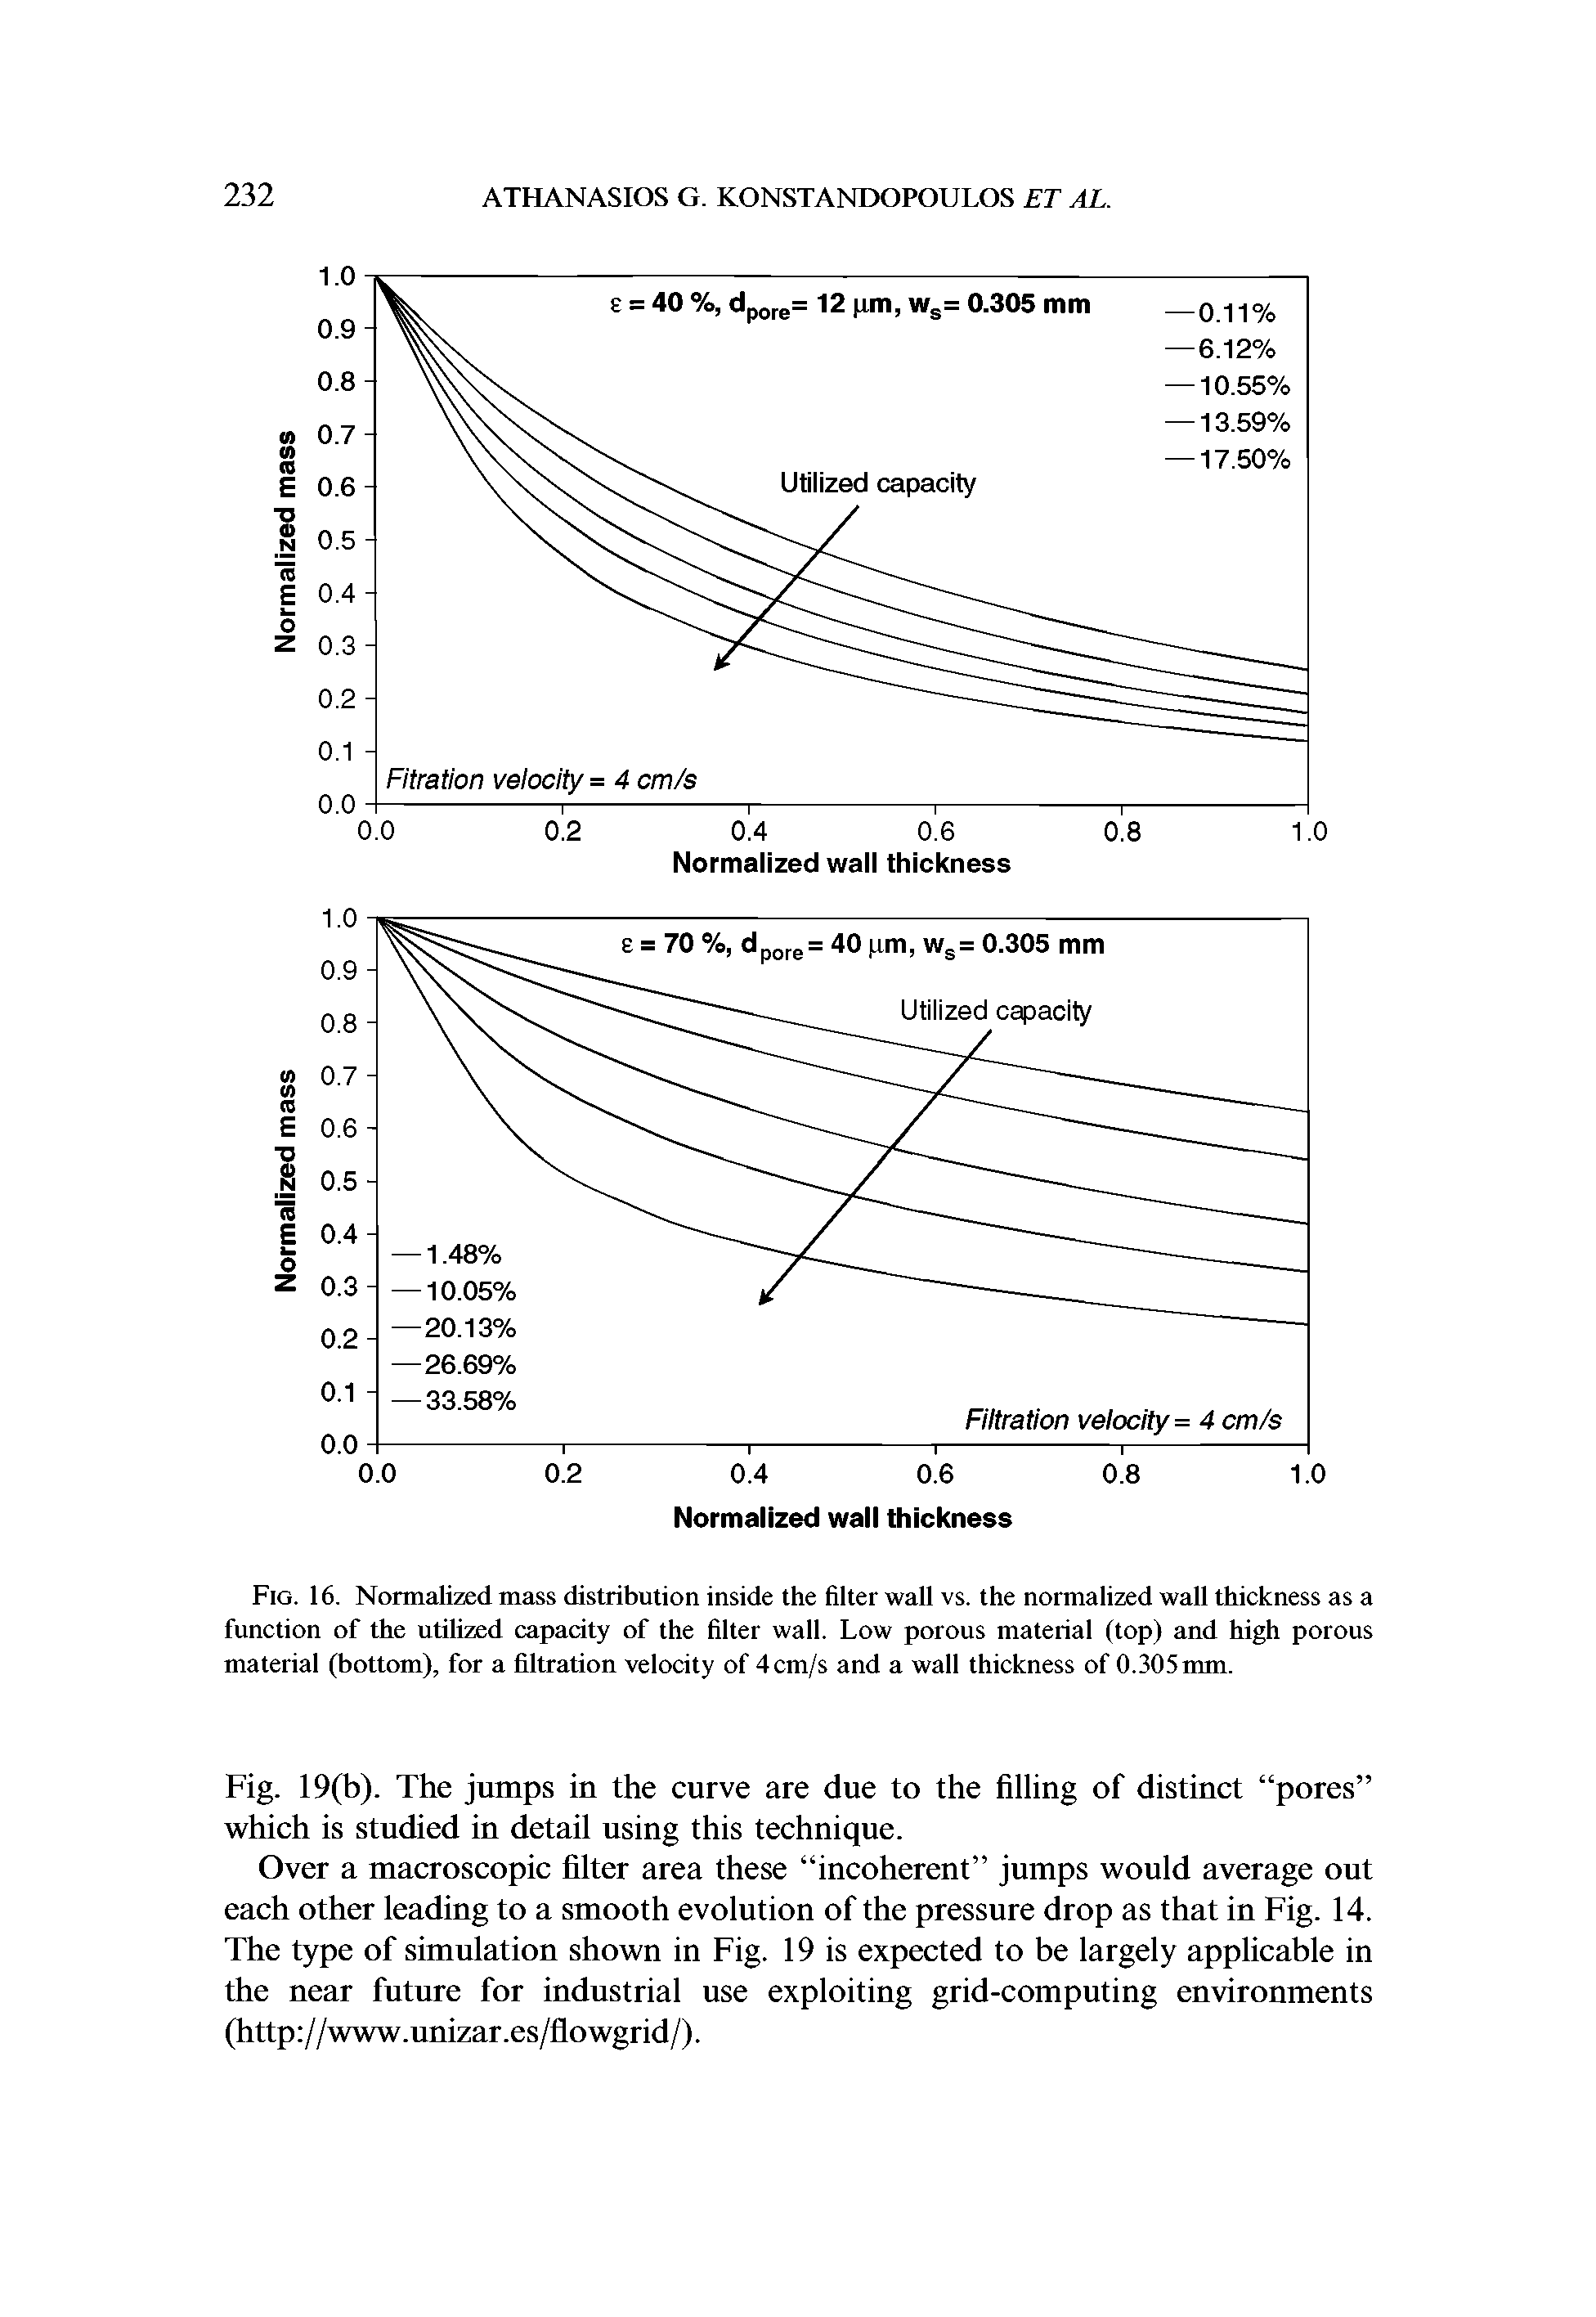 Fig. 16. Normalized mass distribution inside the filter wall vs. the normalized wall thickness as a function of the utilized capacity of the filter wall. Low porous material (top) and high porous material (bottom), for a filtration velocity of 4cm/s and a wall thickness of 0.305 mm.